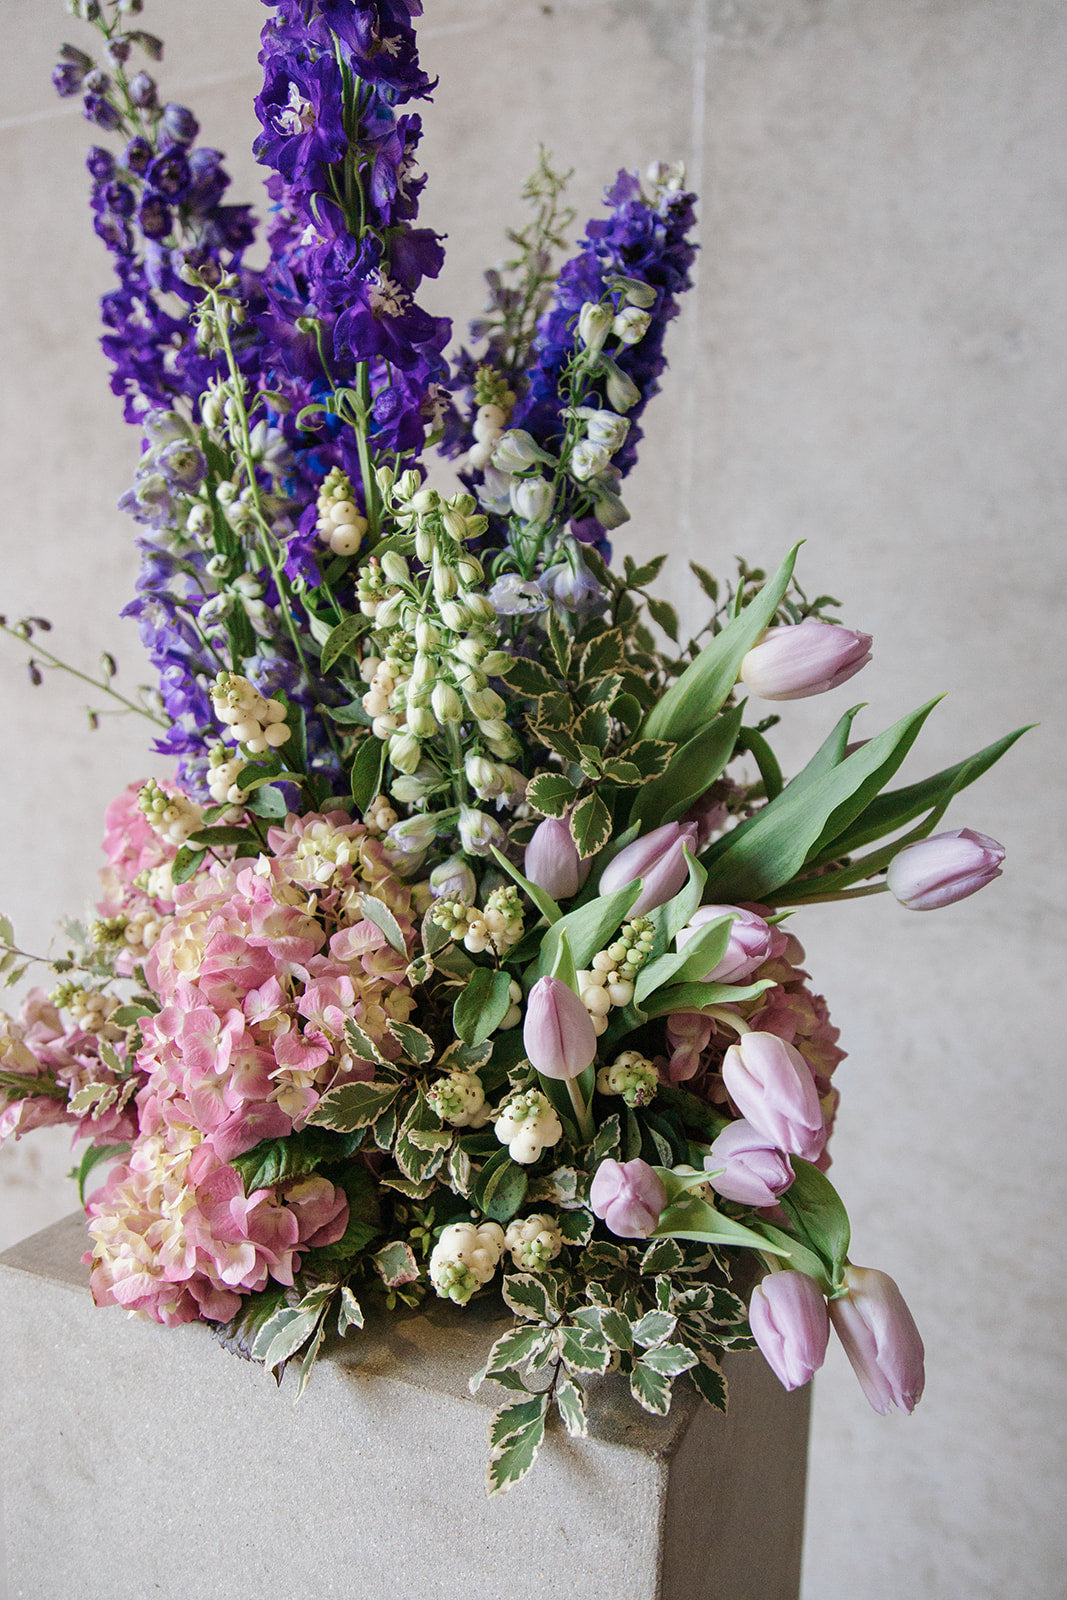 Statement floral arrangement in white green and purple colour - side view